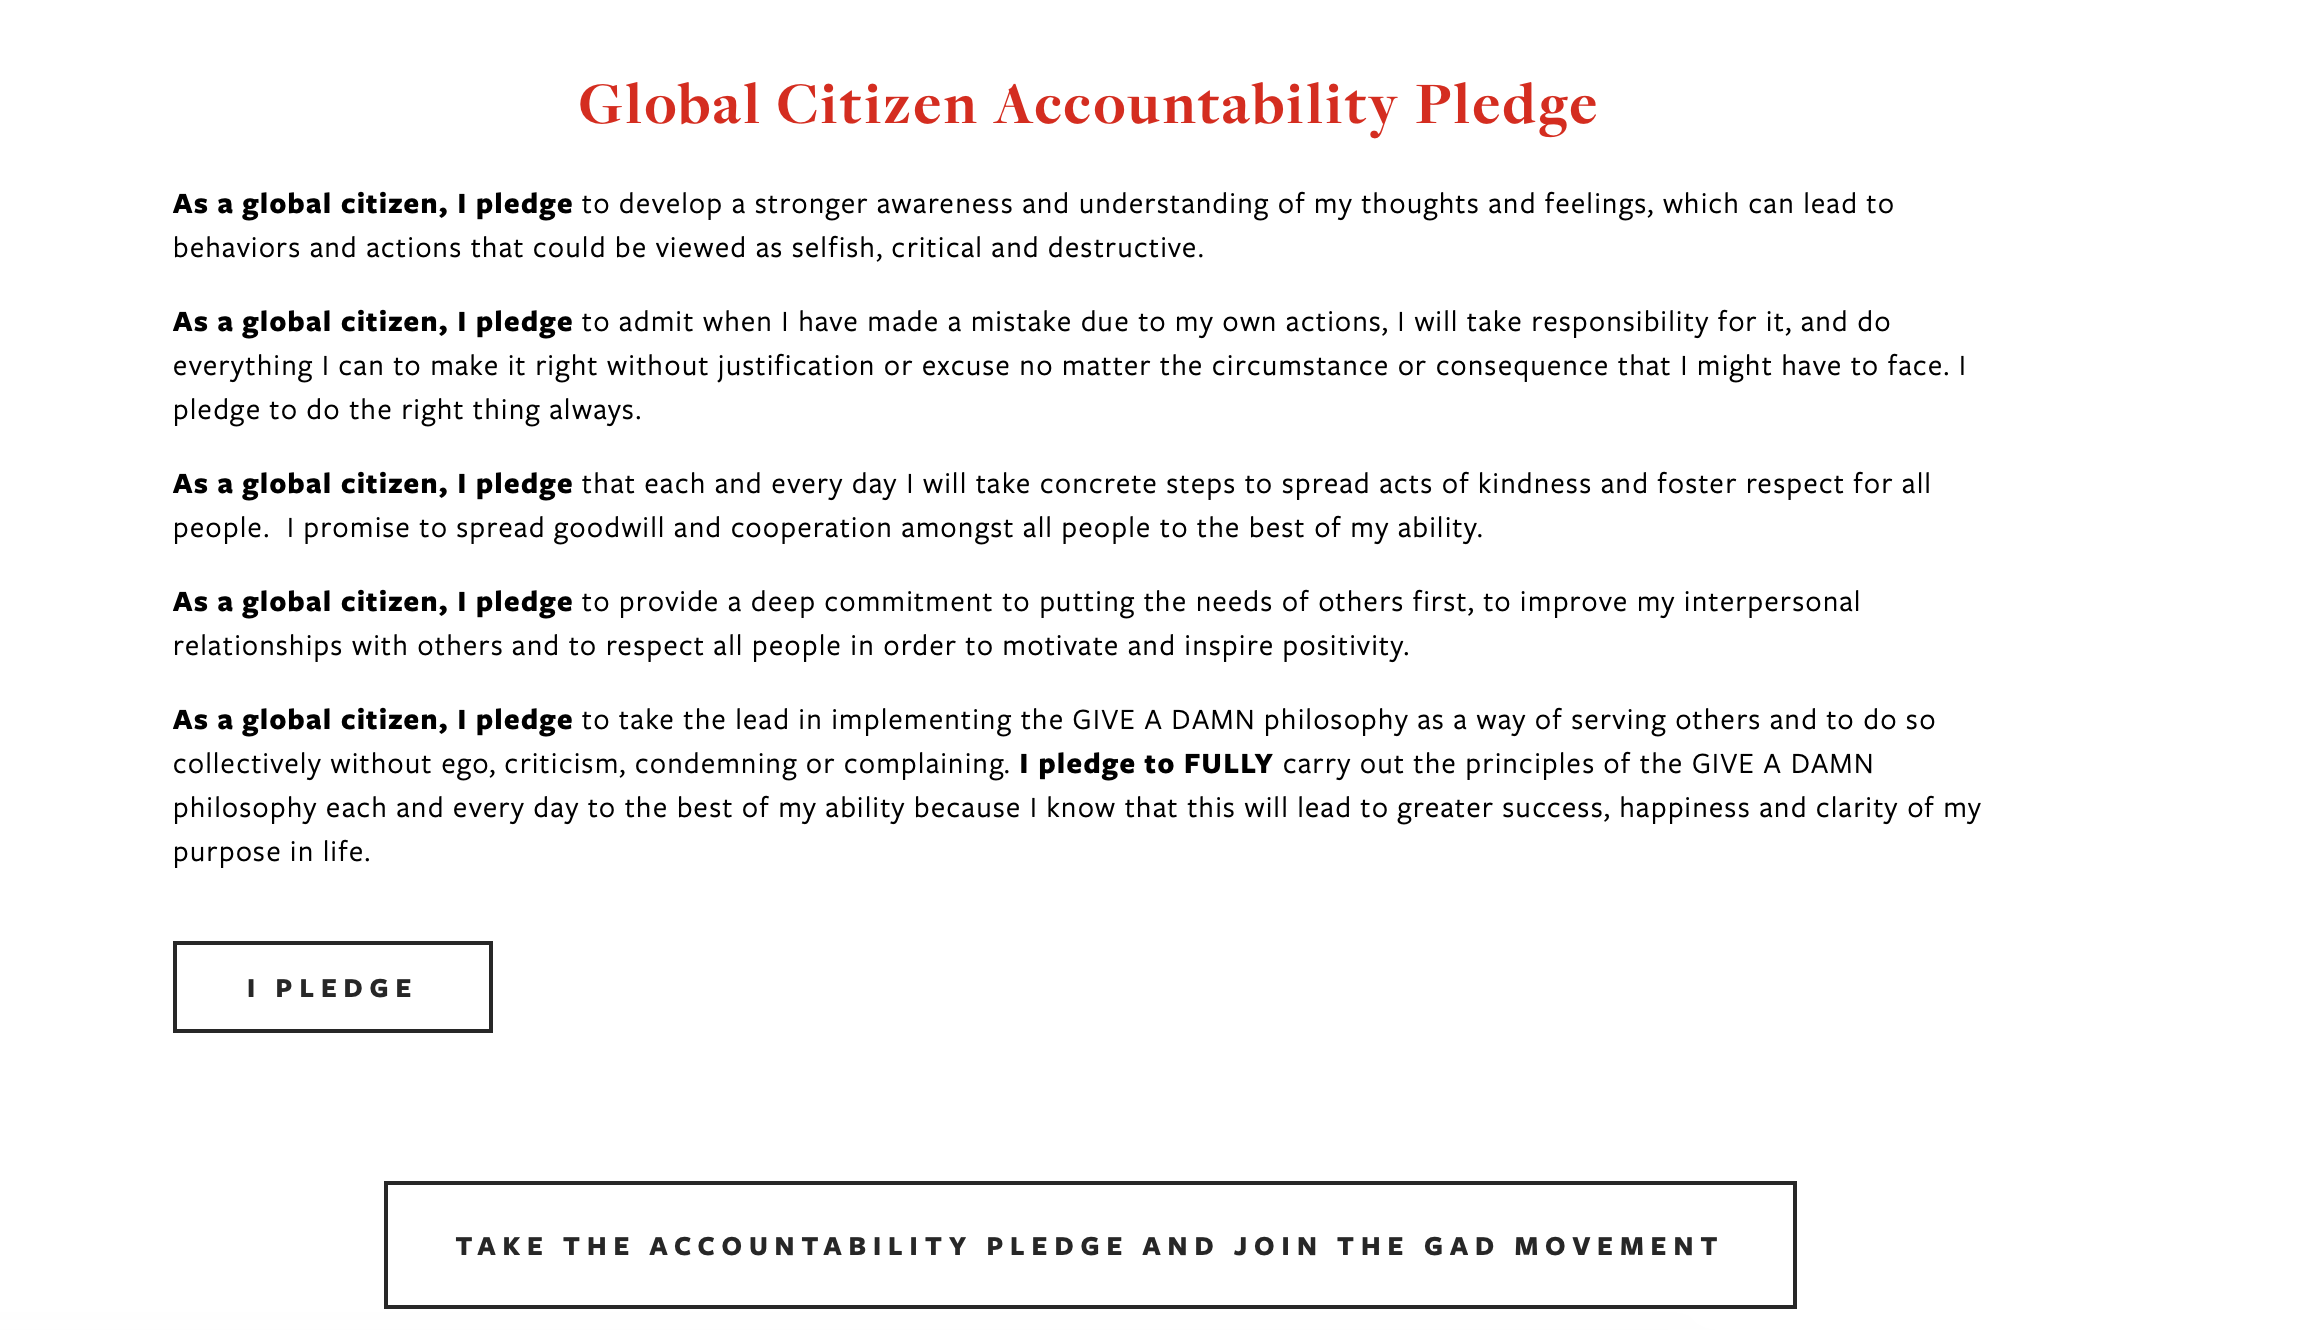 Author, Mark S. Lewis, will donate $1 for each person who takes the GIVE A DAMN American Accountability Pledge.